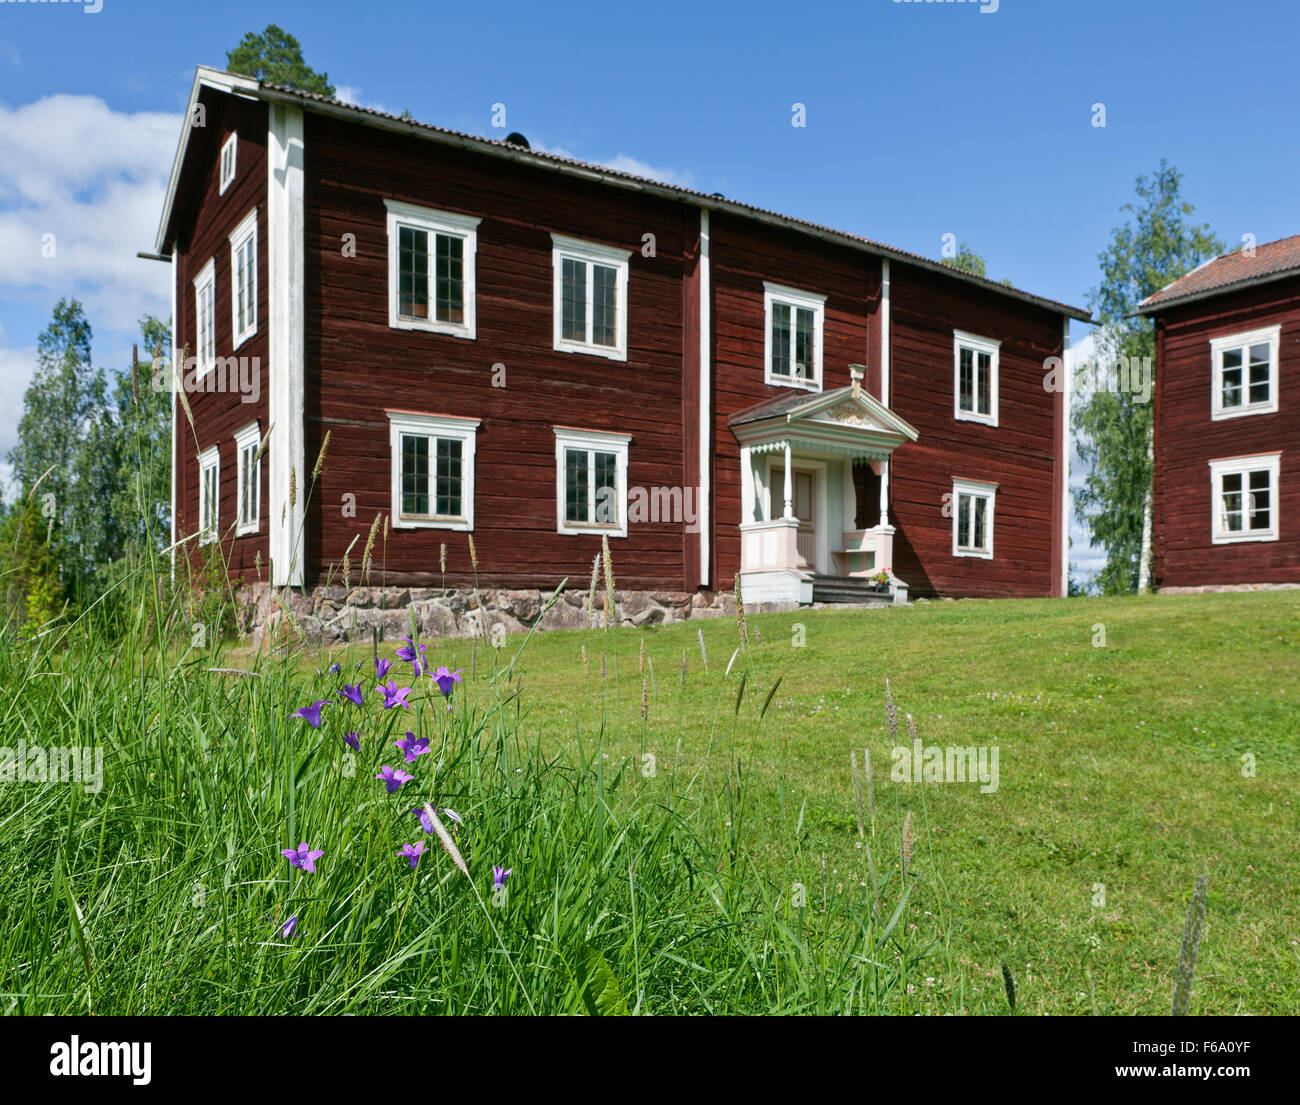 HALSINGLAND, SWEDEN ON JULY 24, 2015. View of a beautiful wooden homestead. UNESCO World Heritage Site. Flowers. Editorial use. Stock Photo